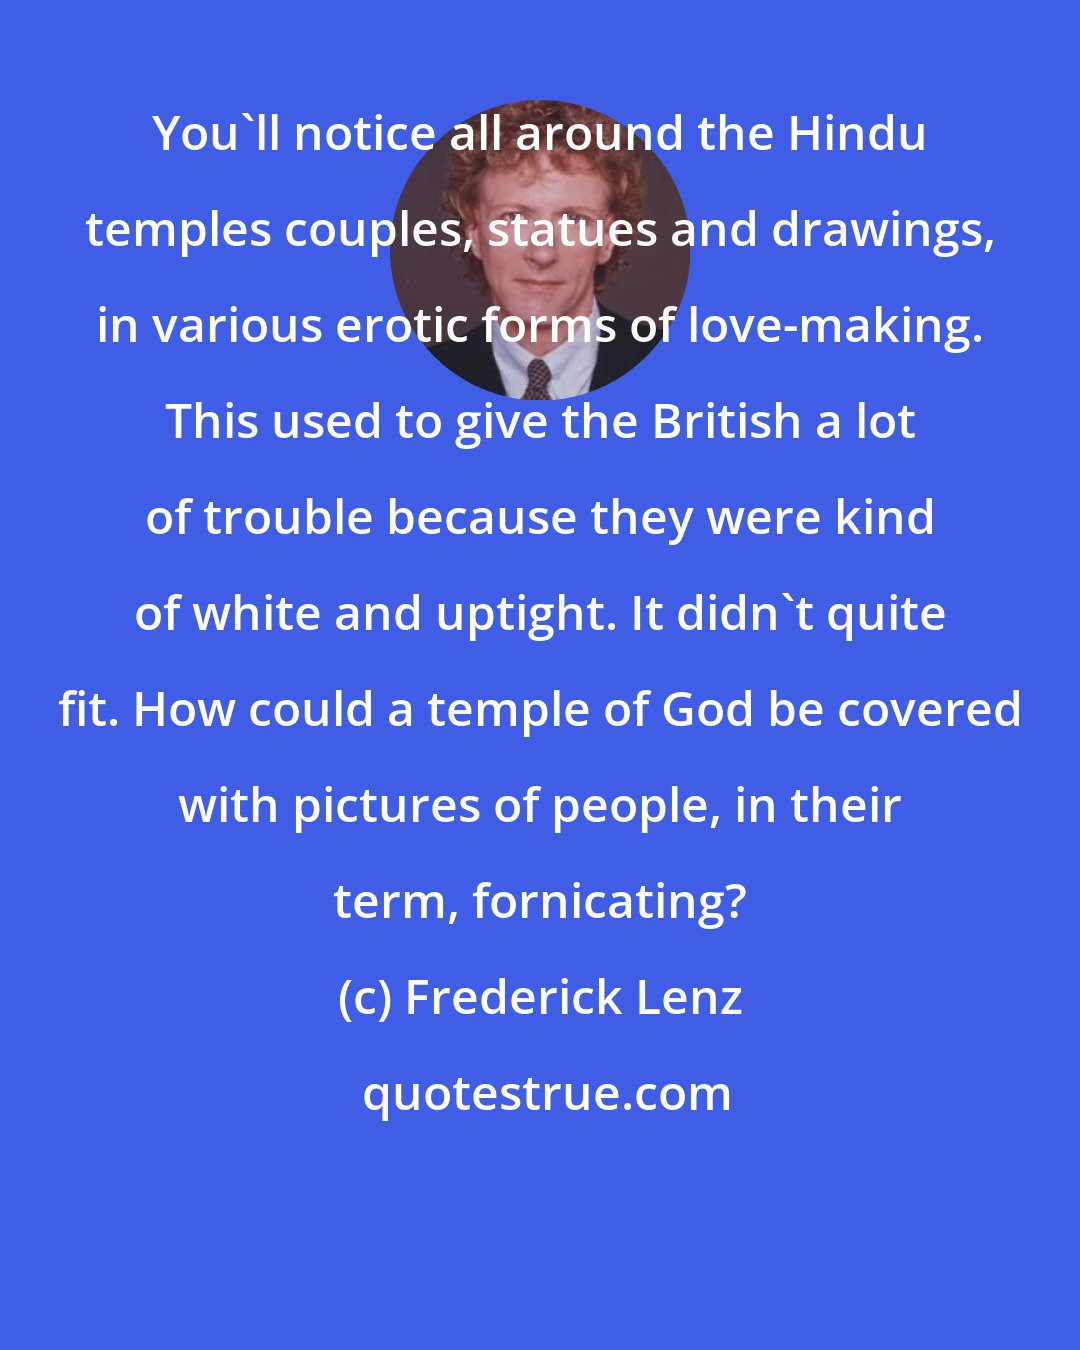 Frederick Lenz: You'll notice all around the Hindu temples couples, statues and drawings, in various erotic forms of love-making. This used to give the British a lot of trouble because they were kind of white and uptight. It didn't quite fit. How could a temple of God be covered with pictures of people, in their term, fornicating?